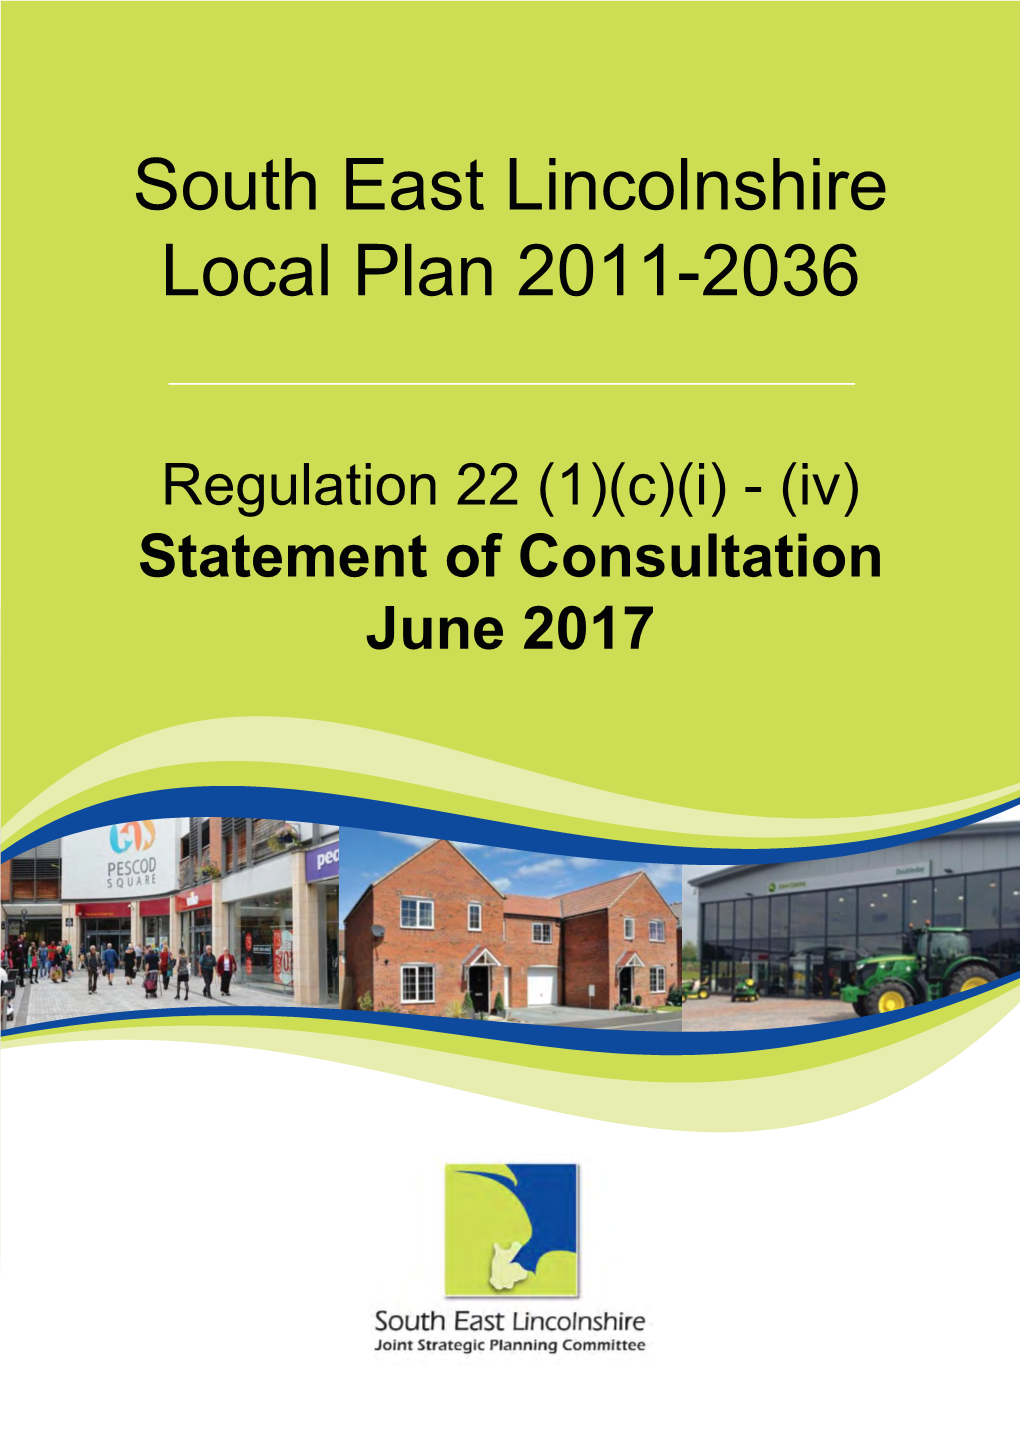 South East Lincolnshire Local Plan 2011-2036